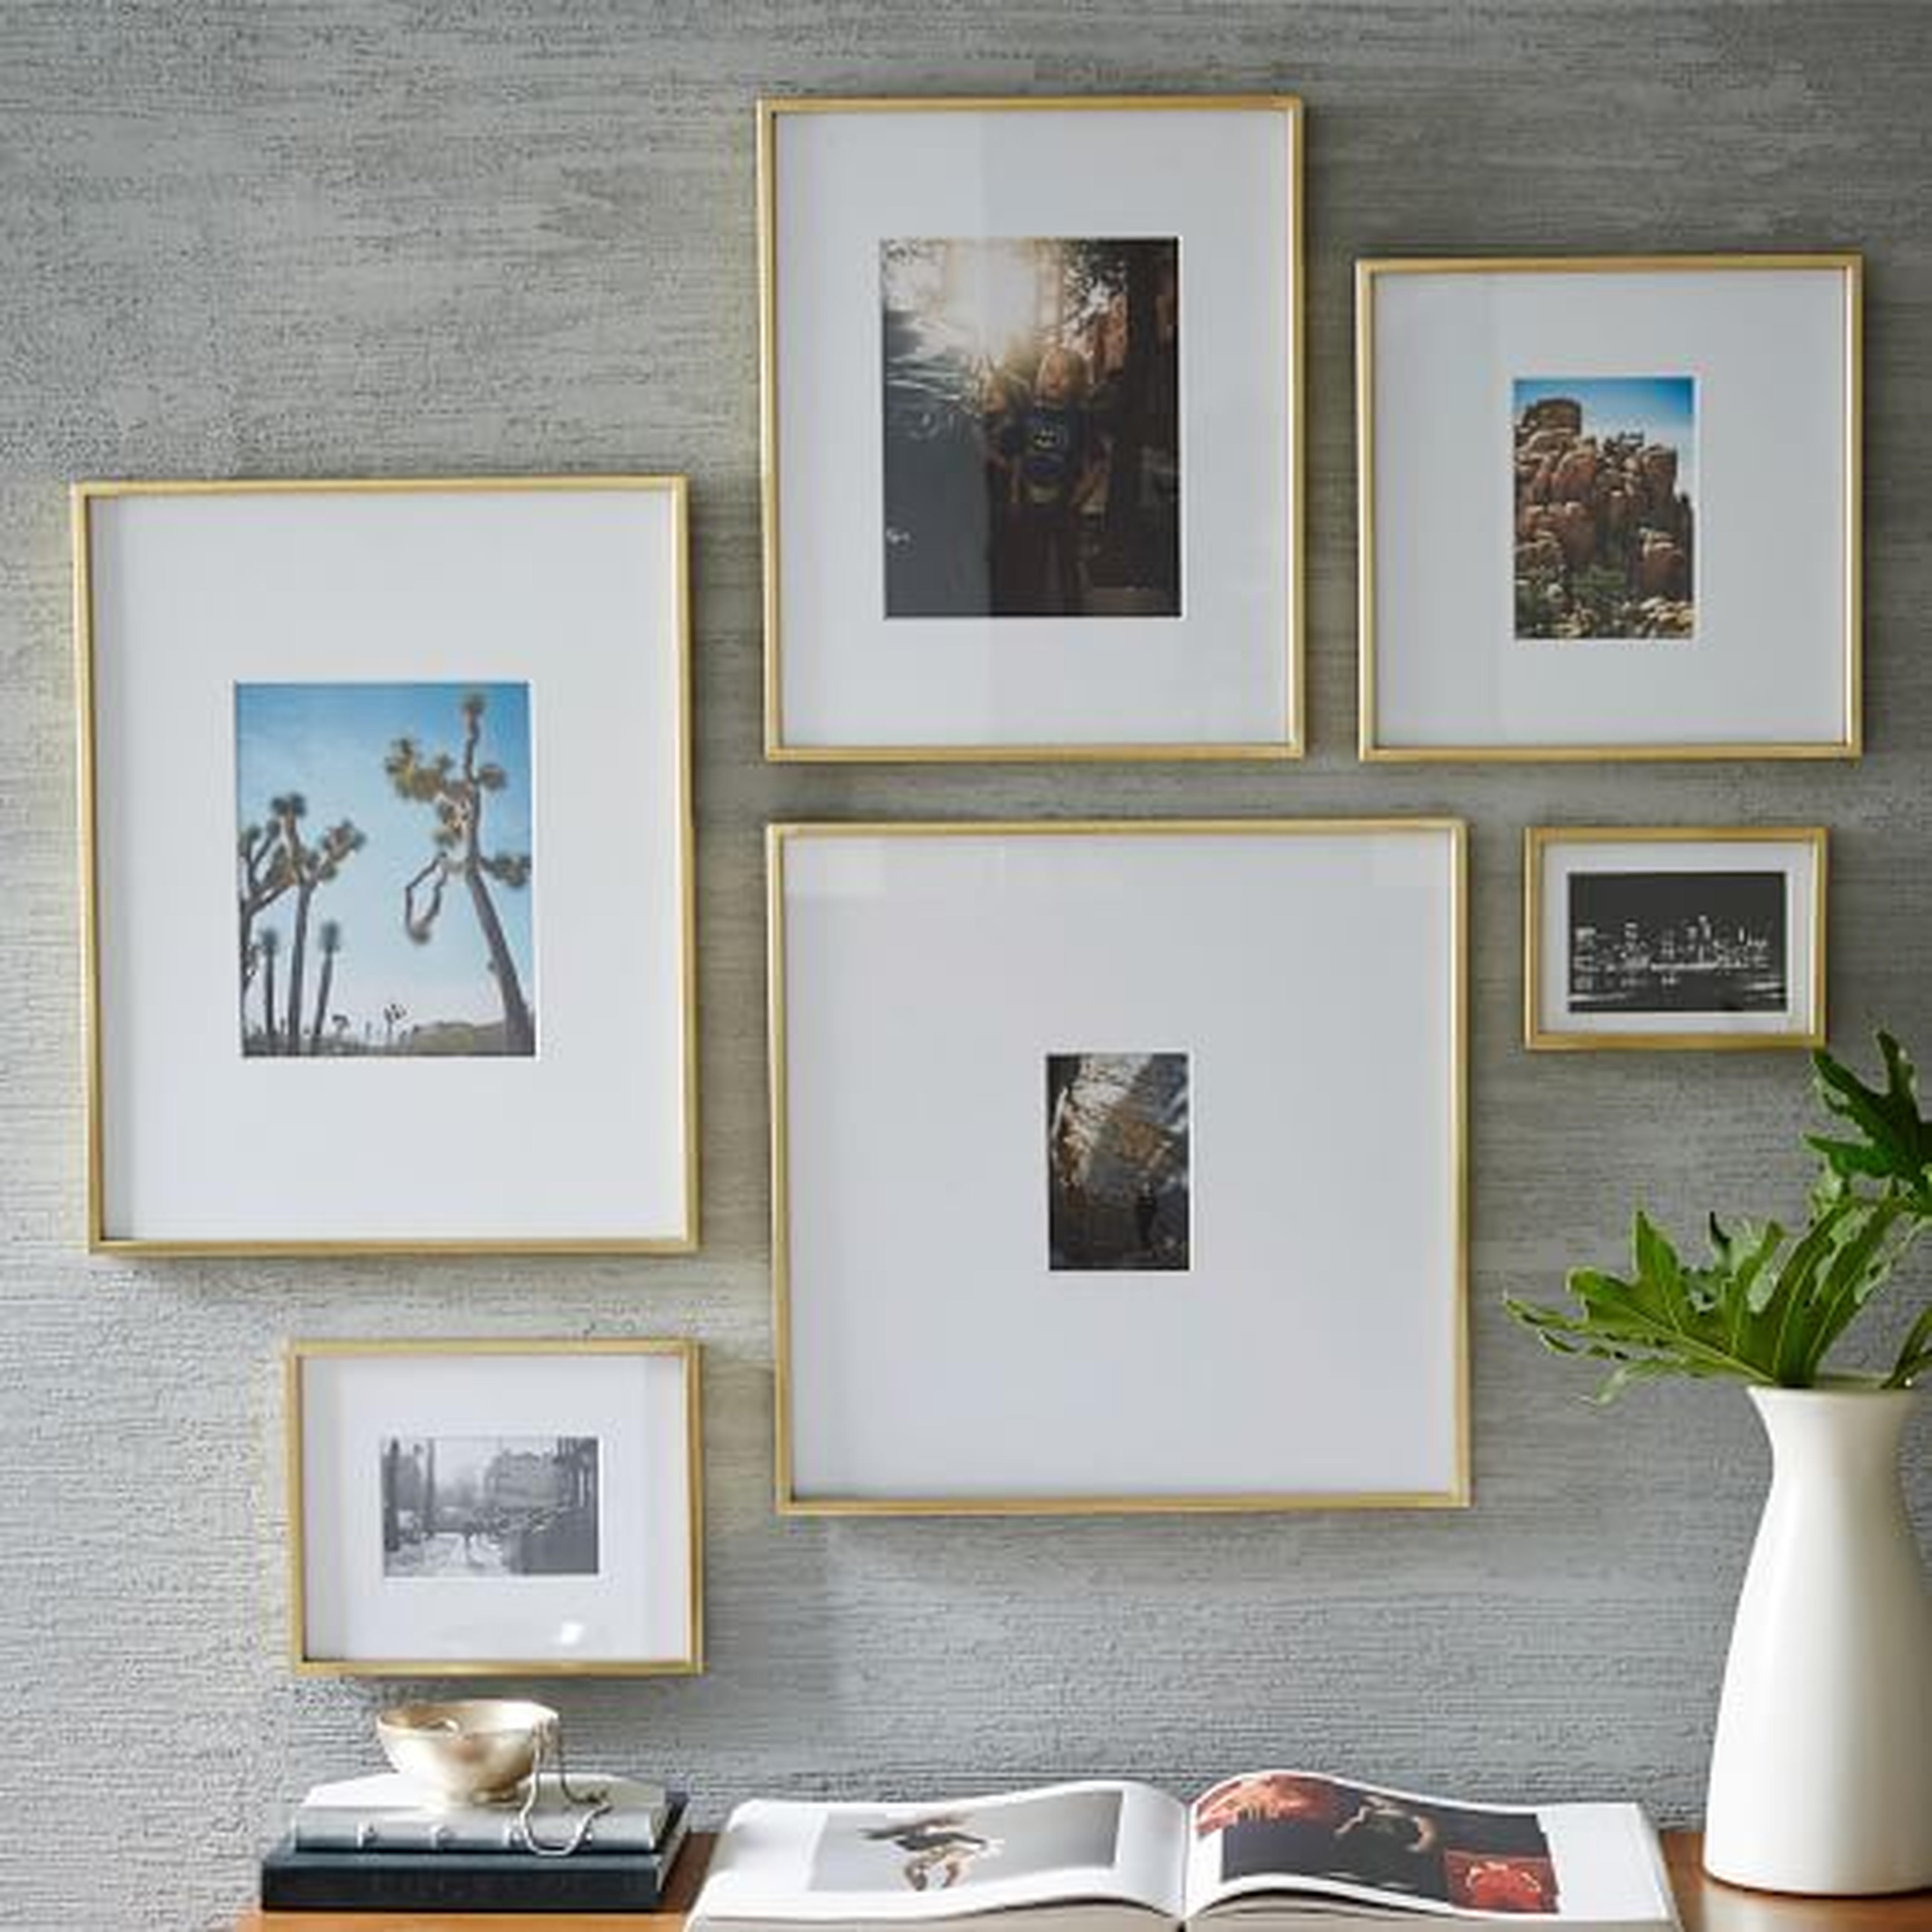 Gallery Frame, Polished Brass, 8" x 10" (15" x 19" without mat) / 15.5" x 19.5" Frame Size - Crate and Barrel